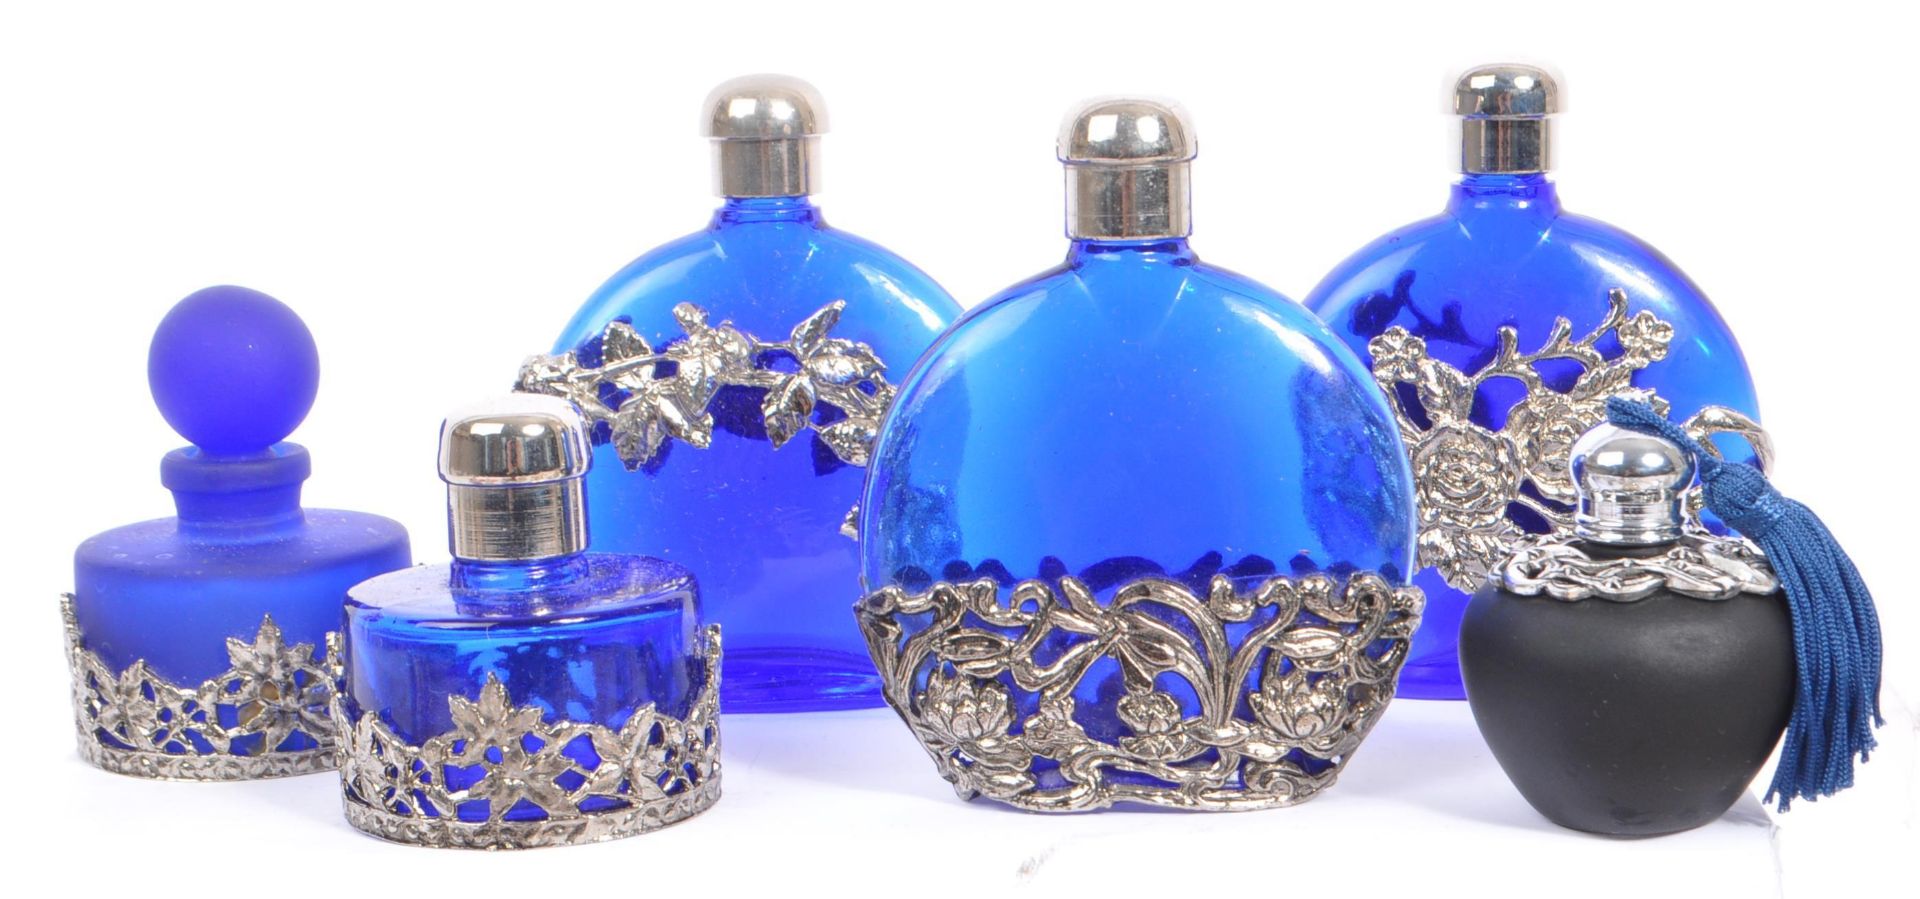 COLLECTION OF PERFUME FRAGRANCE BOTTLES - Image 7 of 10